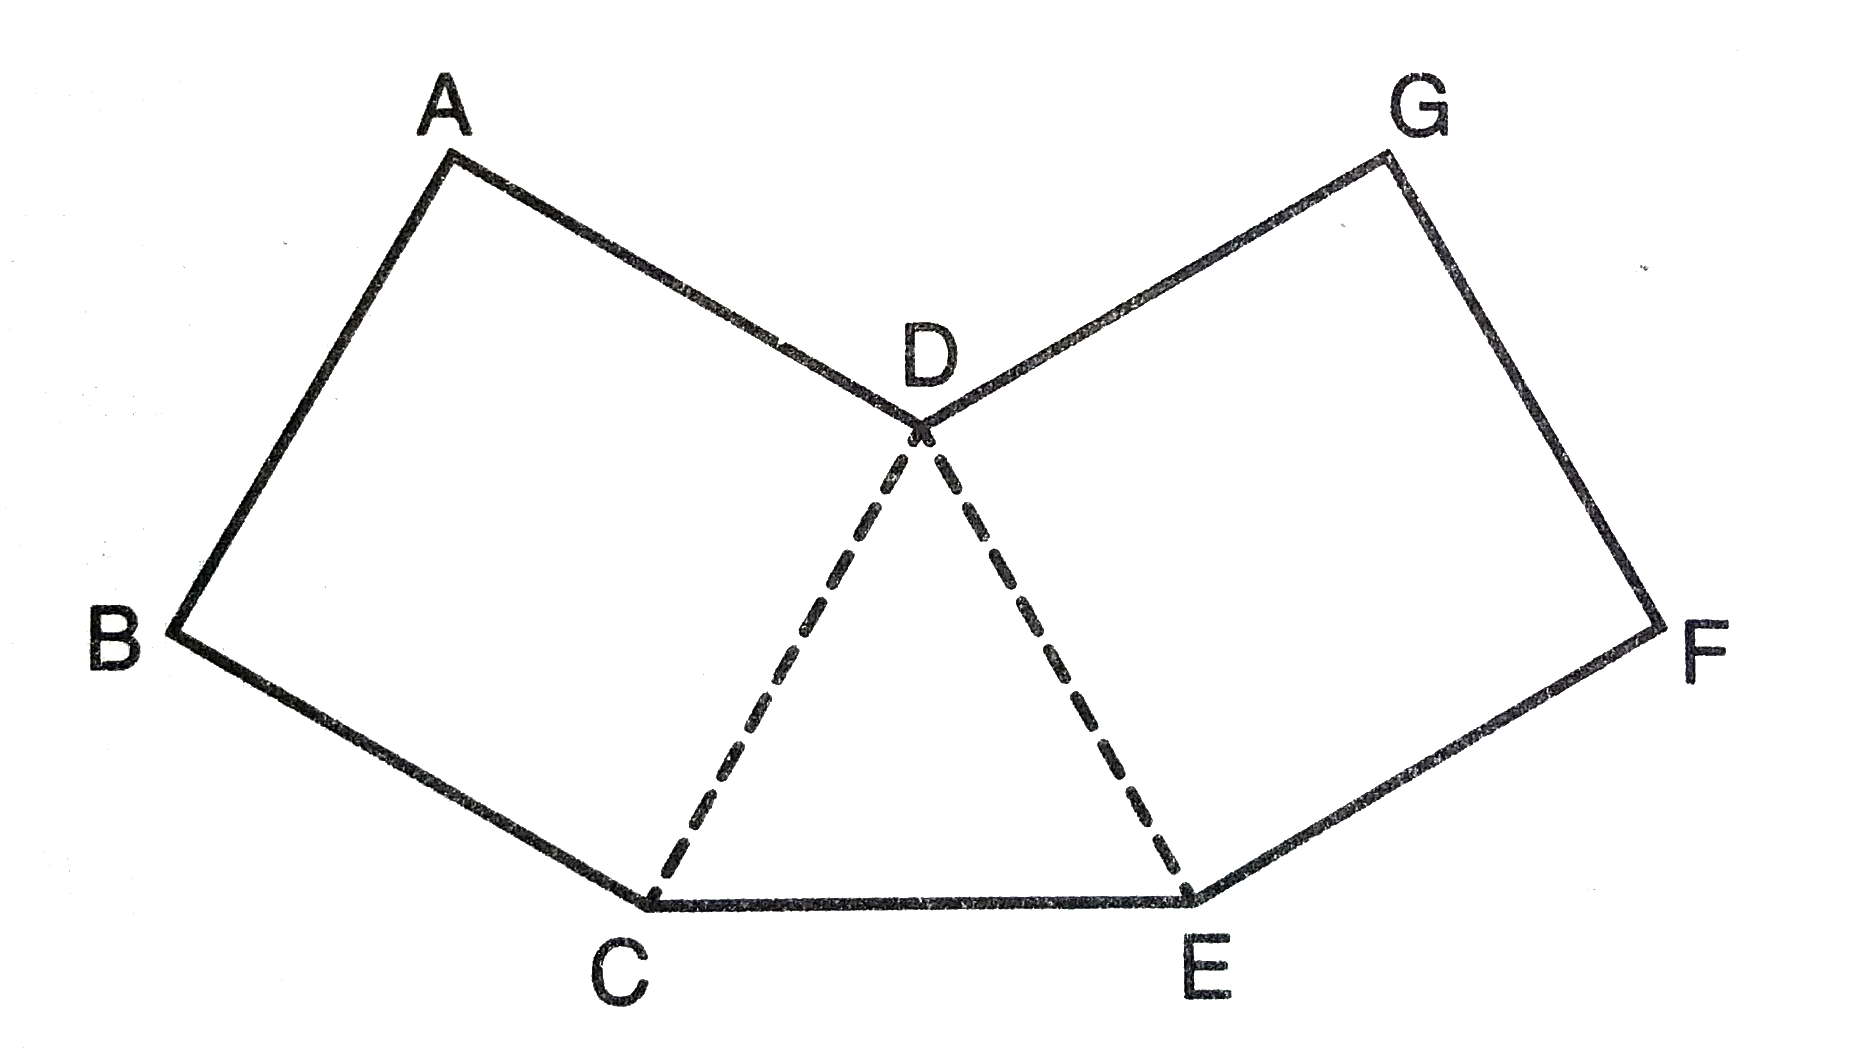 A sterling silver pendant is being designed to have the shape of polygon ABCDEFGD shown above where ABCD and EFGD are squares and triangle CDE is equilateral. If the area of triangleCDE is (27)/(sqrt(3)) square centimeter, what is the total linear distance around the pendant?